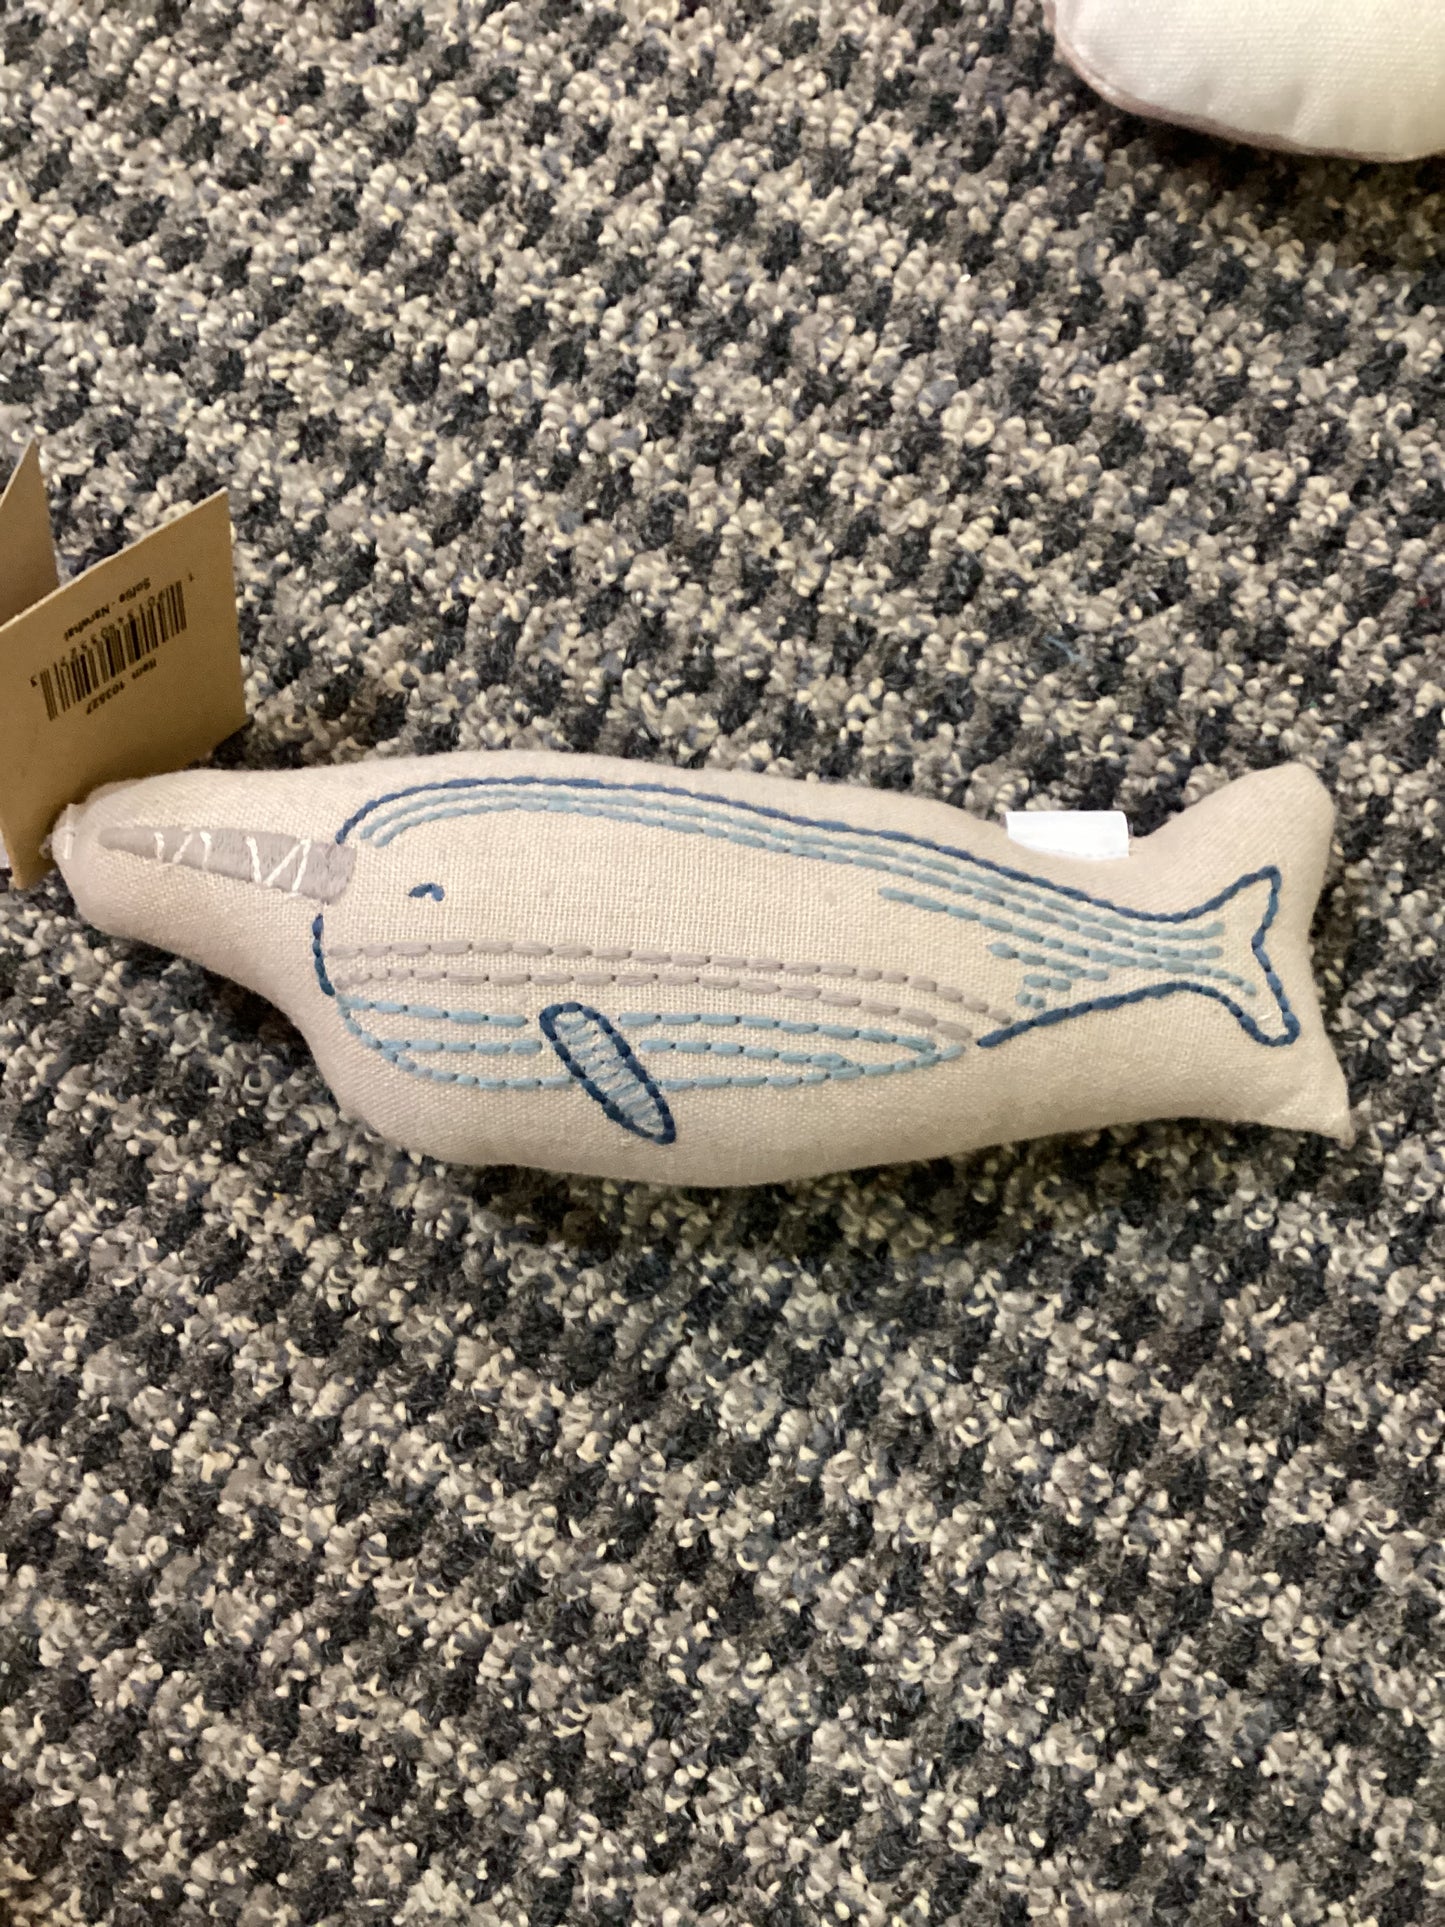 Narwhal Shaped pillow